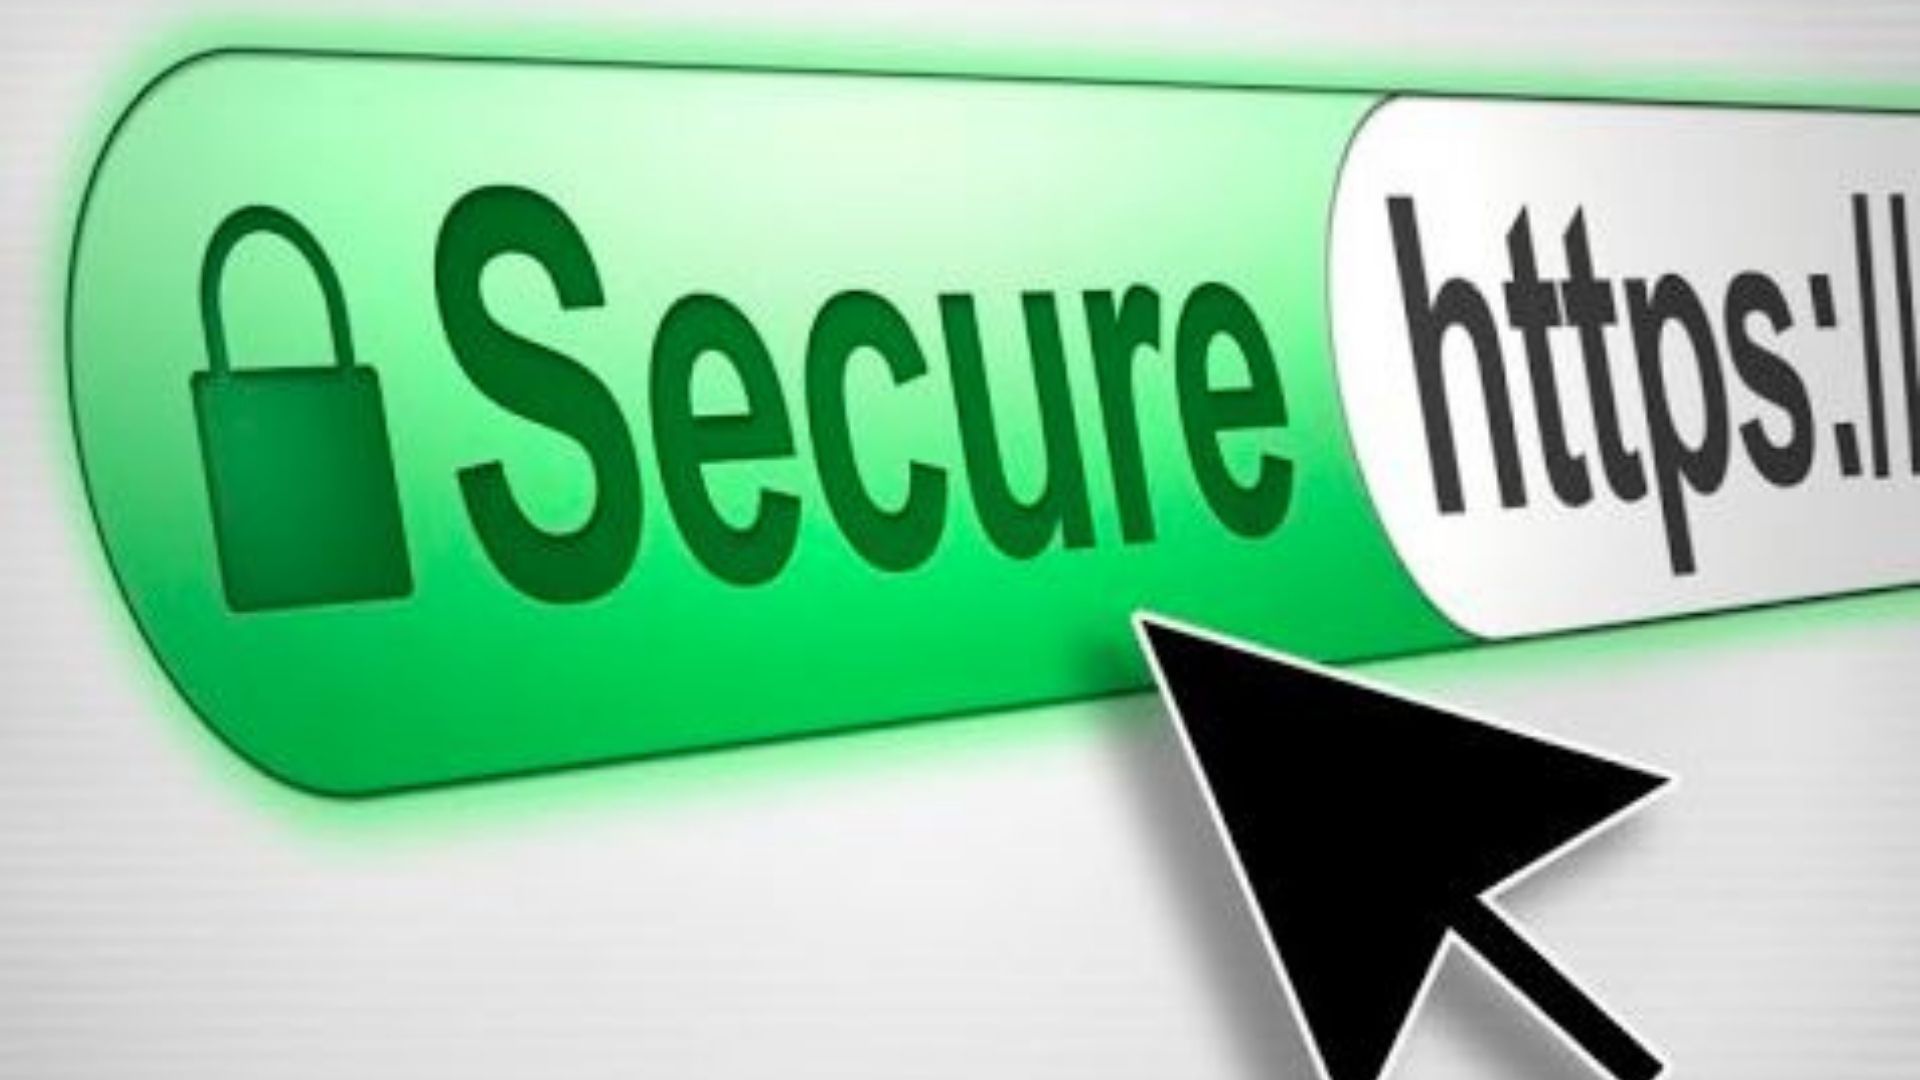 How to Install a Free SSL Certificate in WordPress